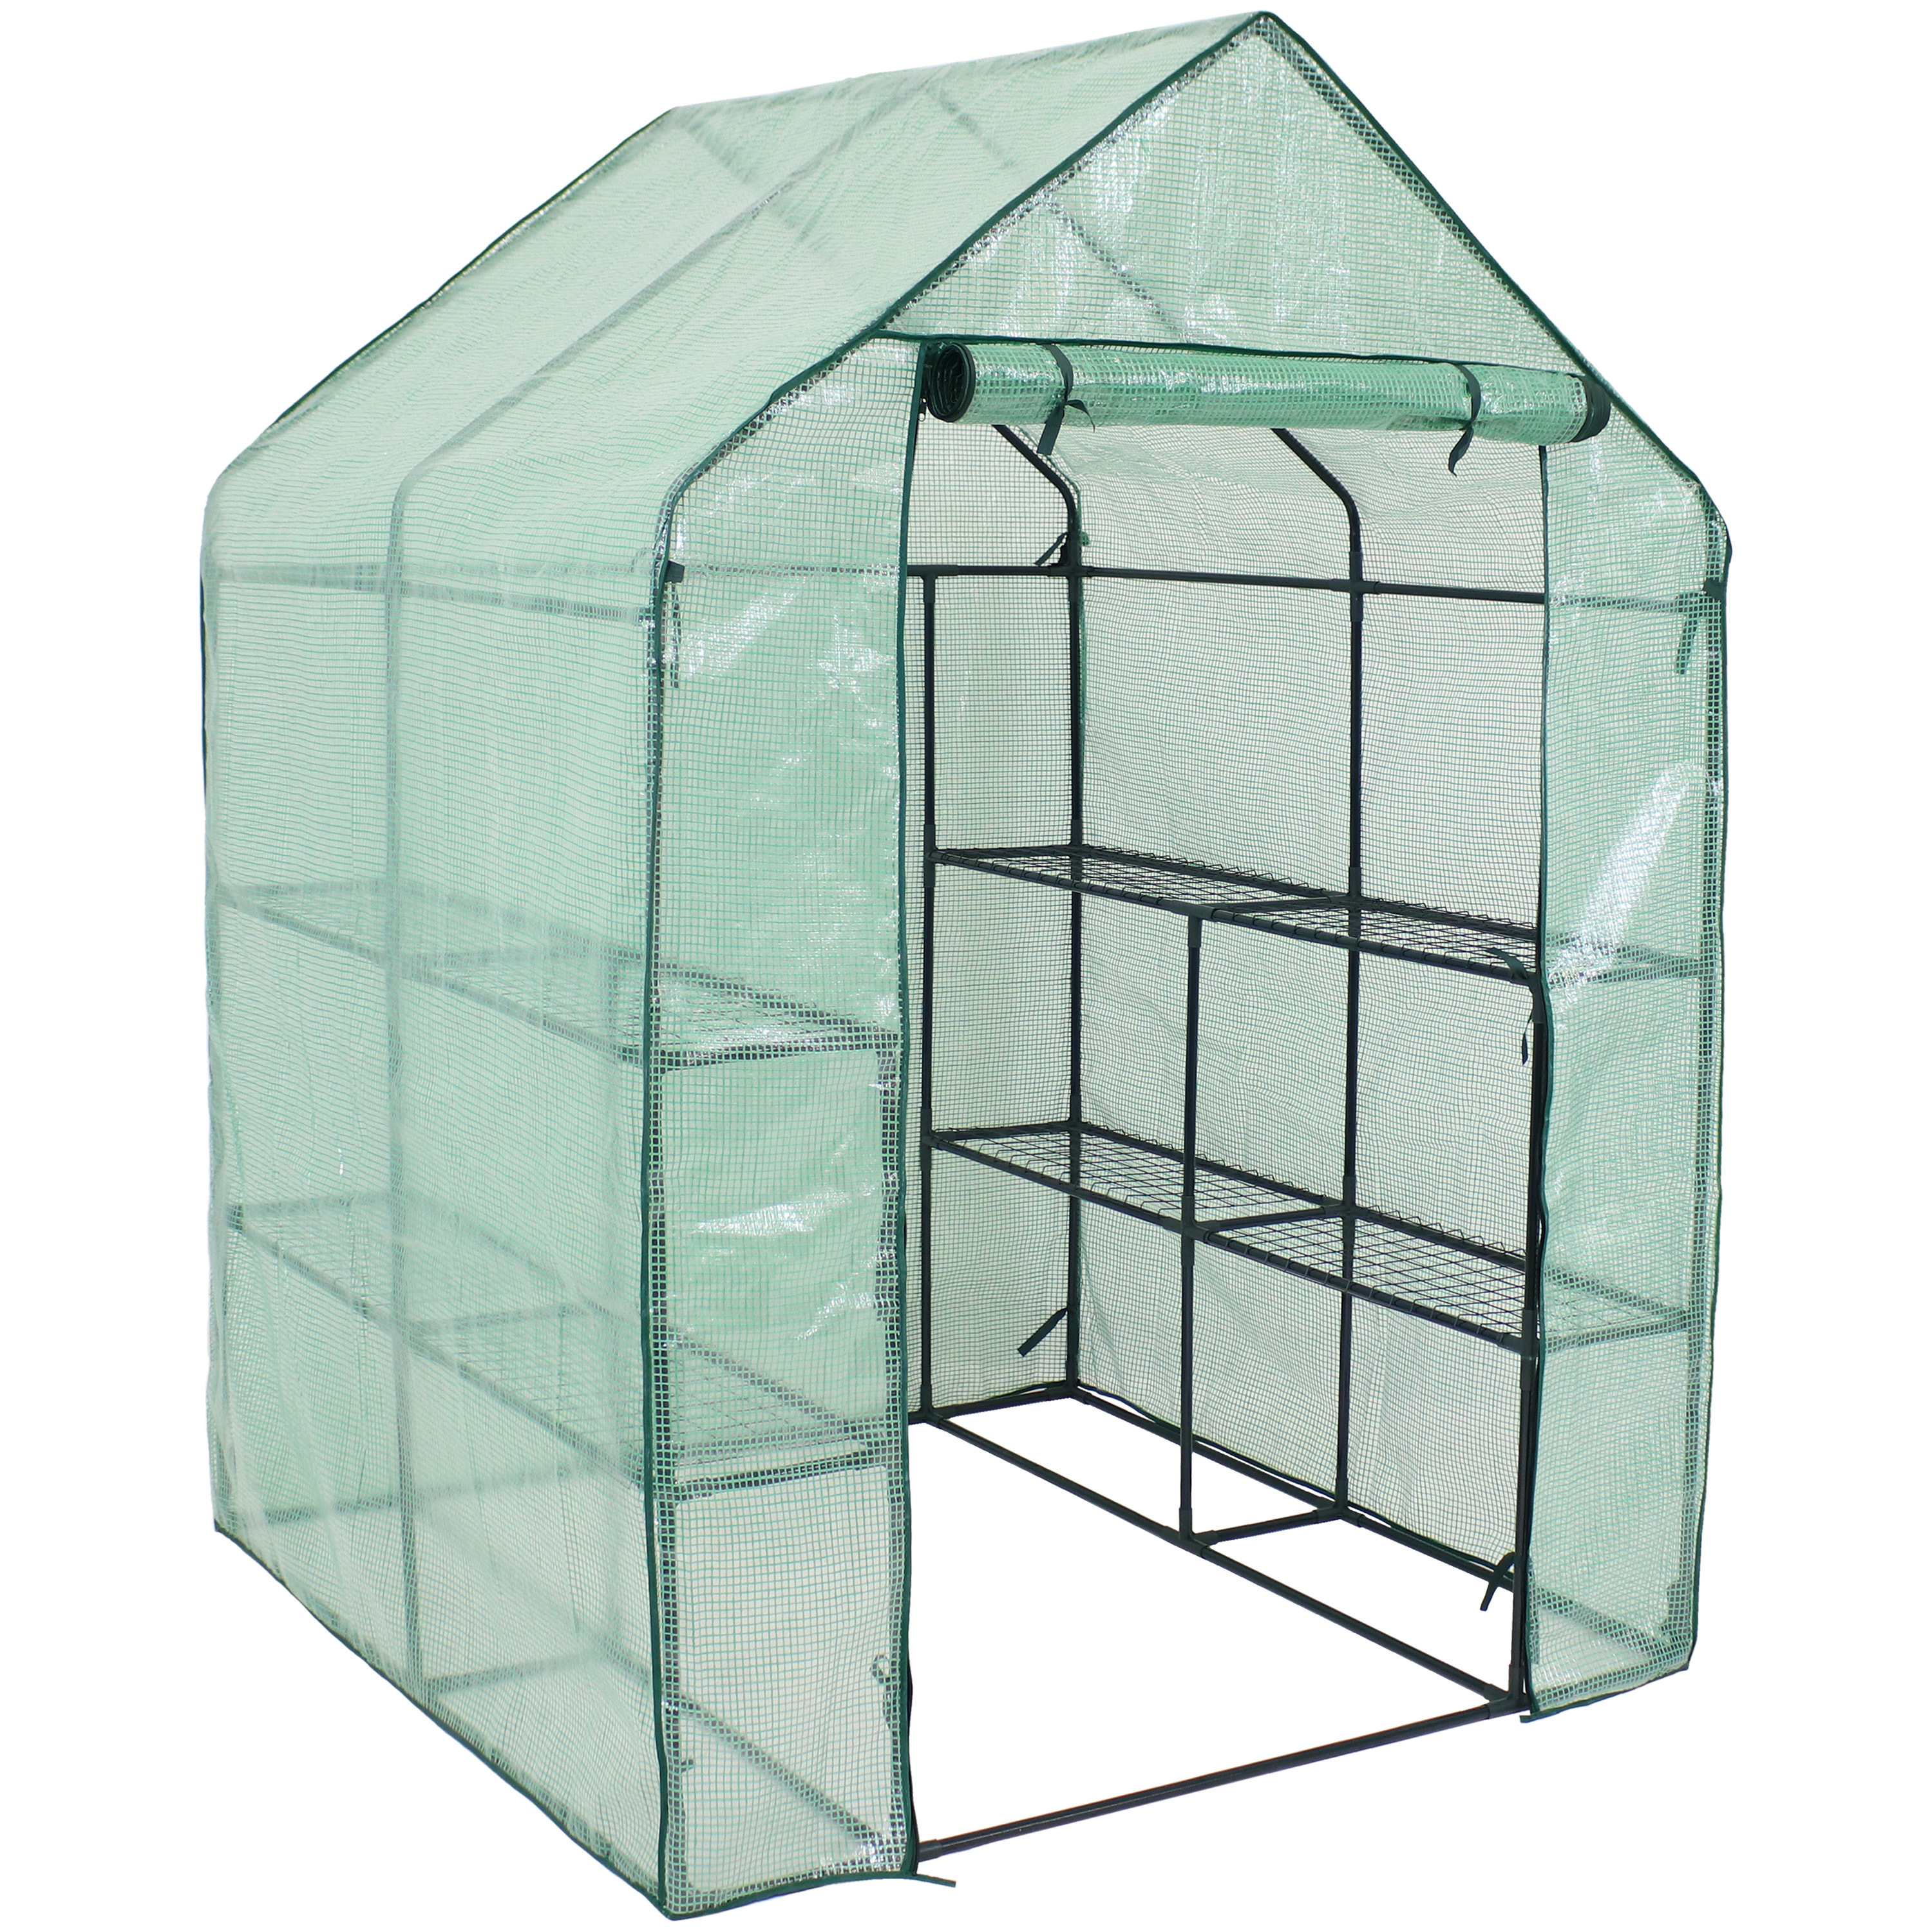 Large Steel Walk-In Greenhouse with 4 Shelves - Green